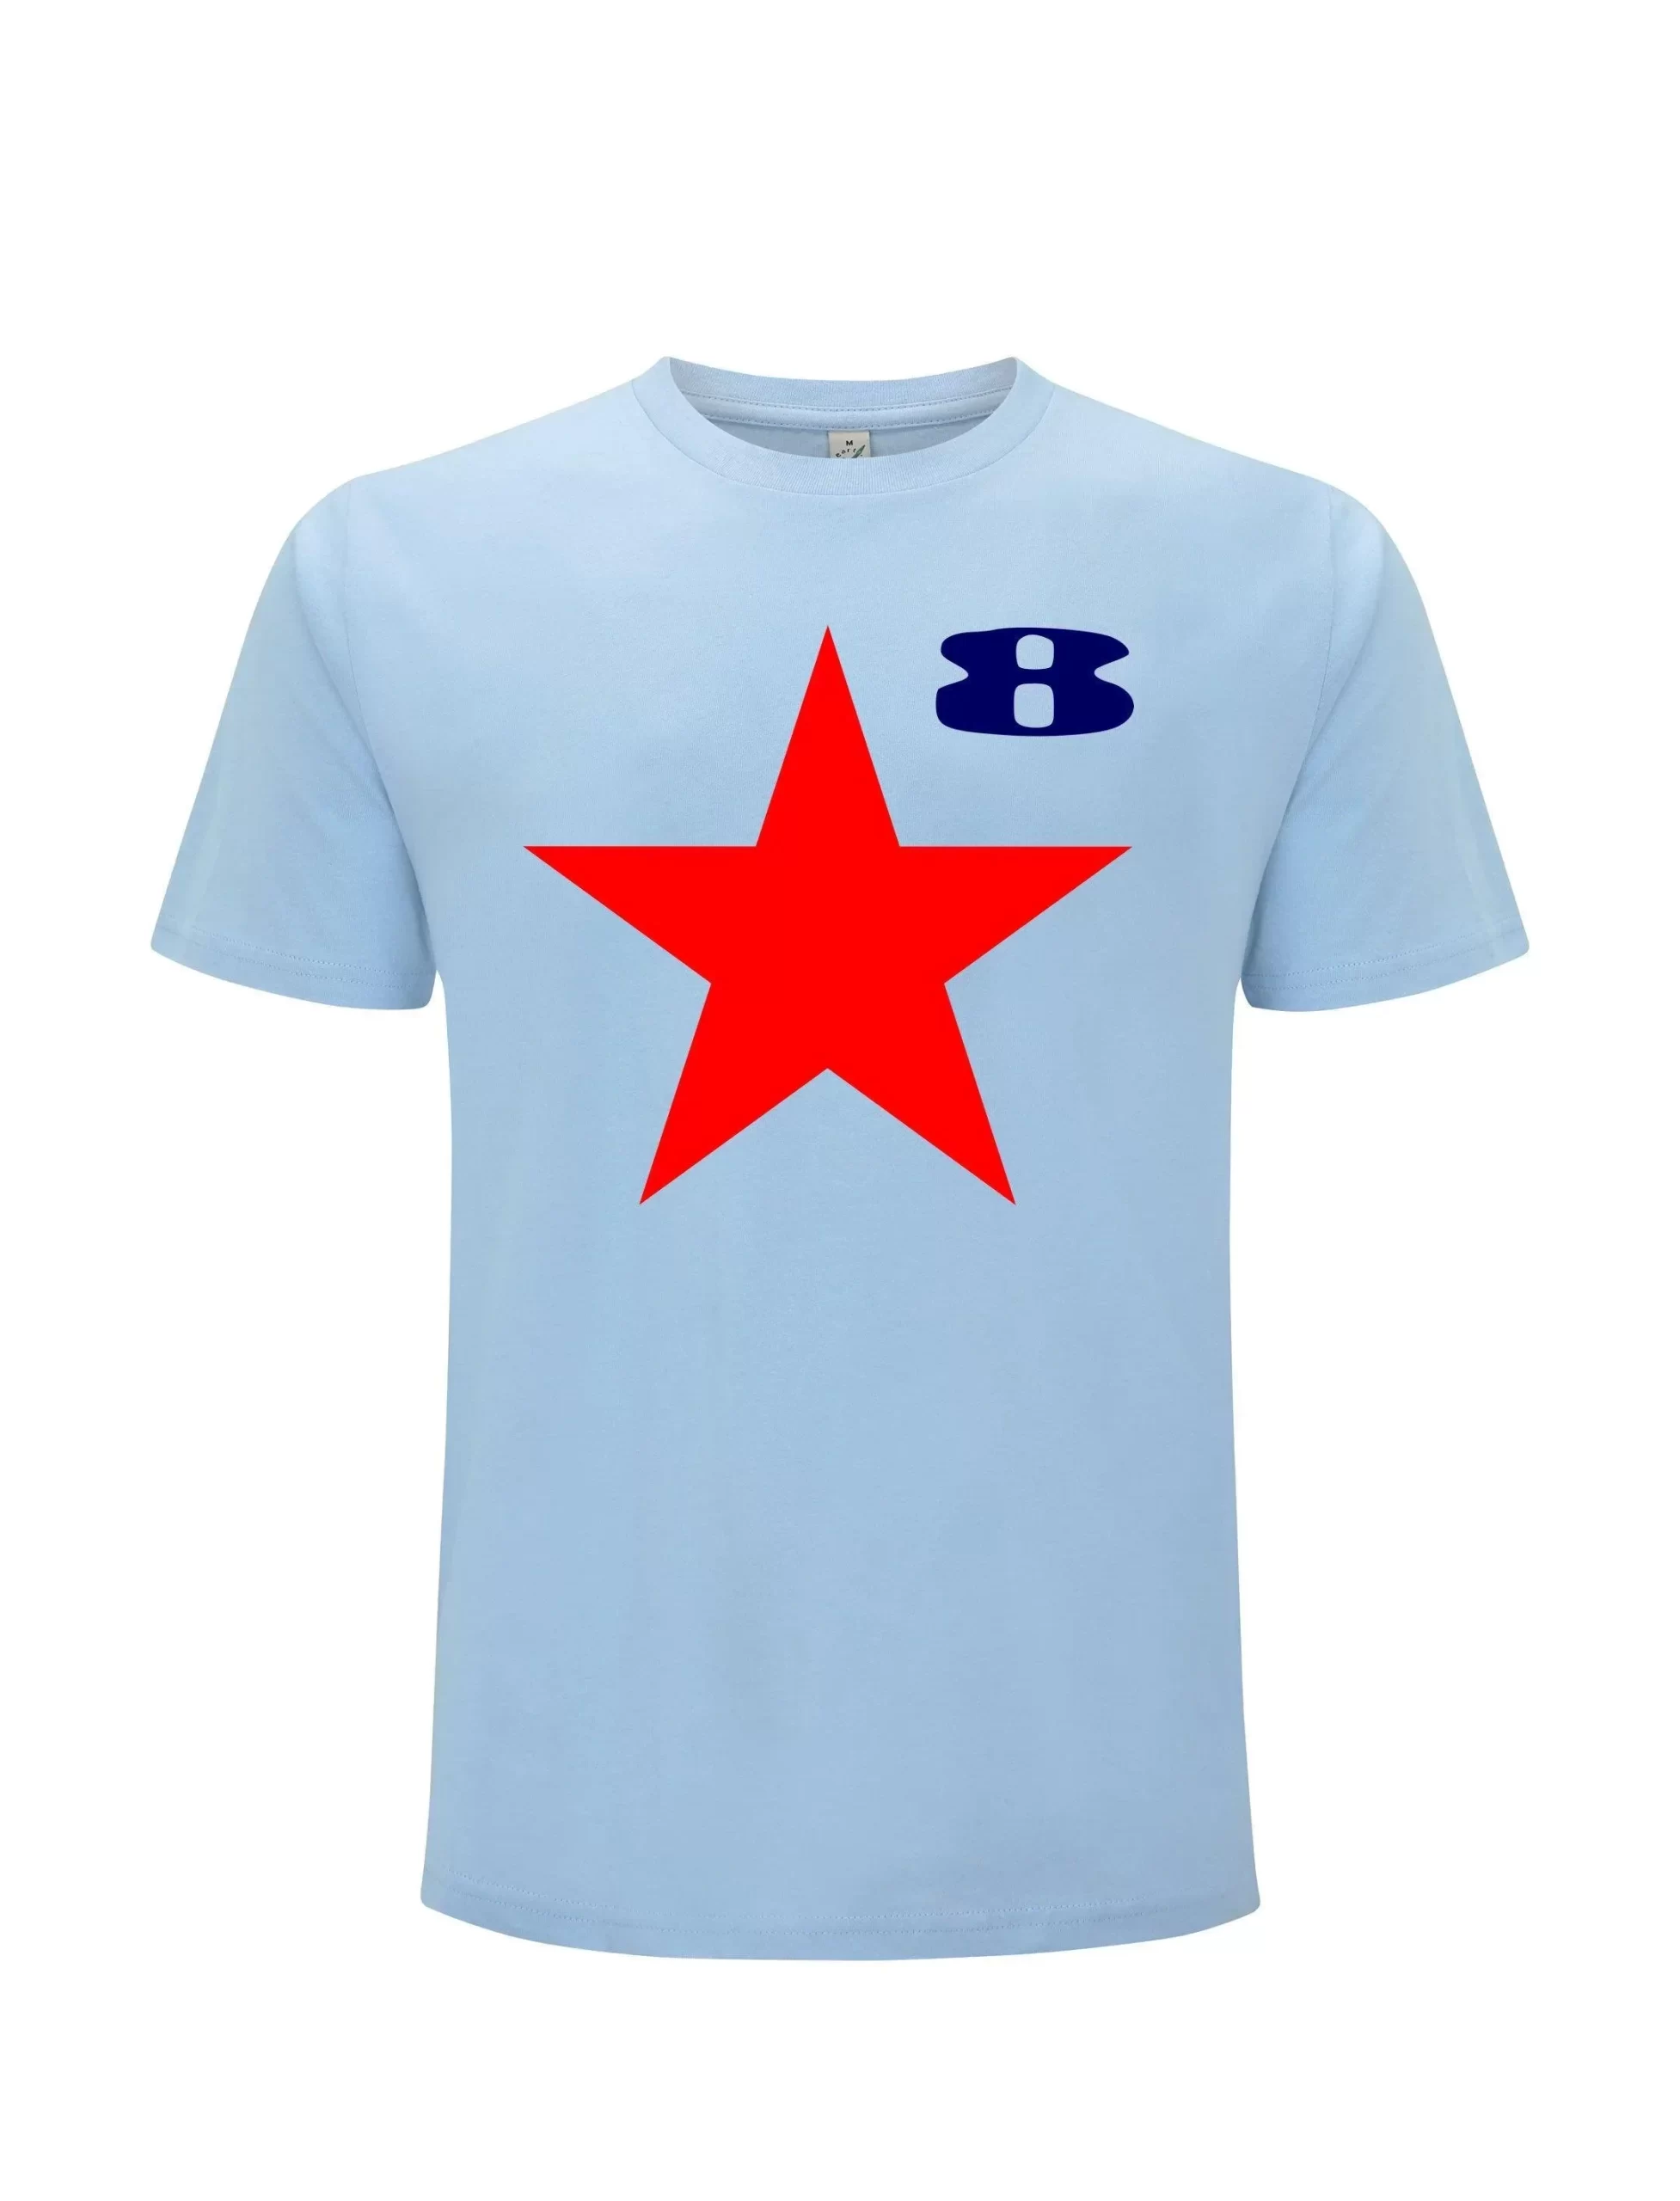 STAR (Sky Blue): T-Shirt Inspired by Peter Blake and Paul Weller